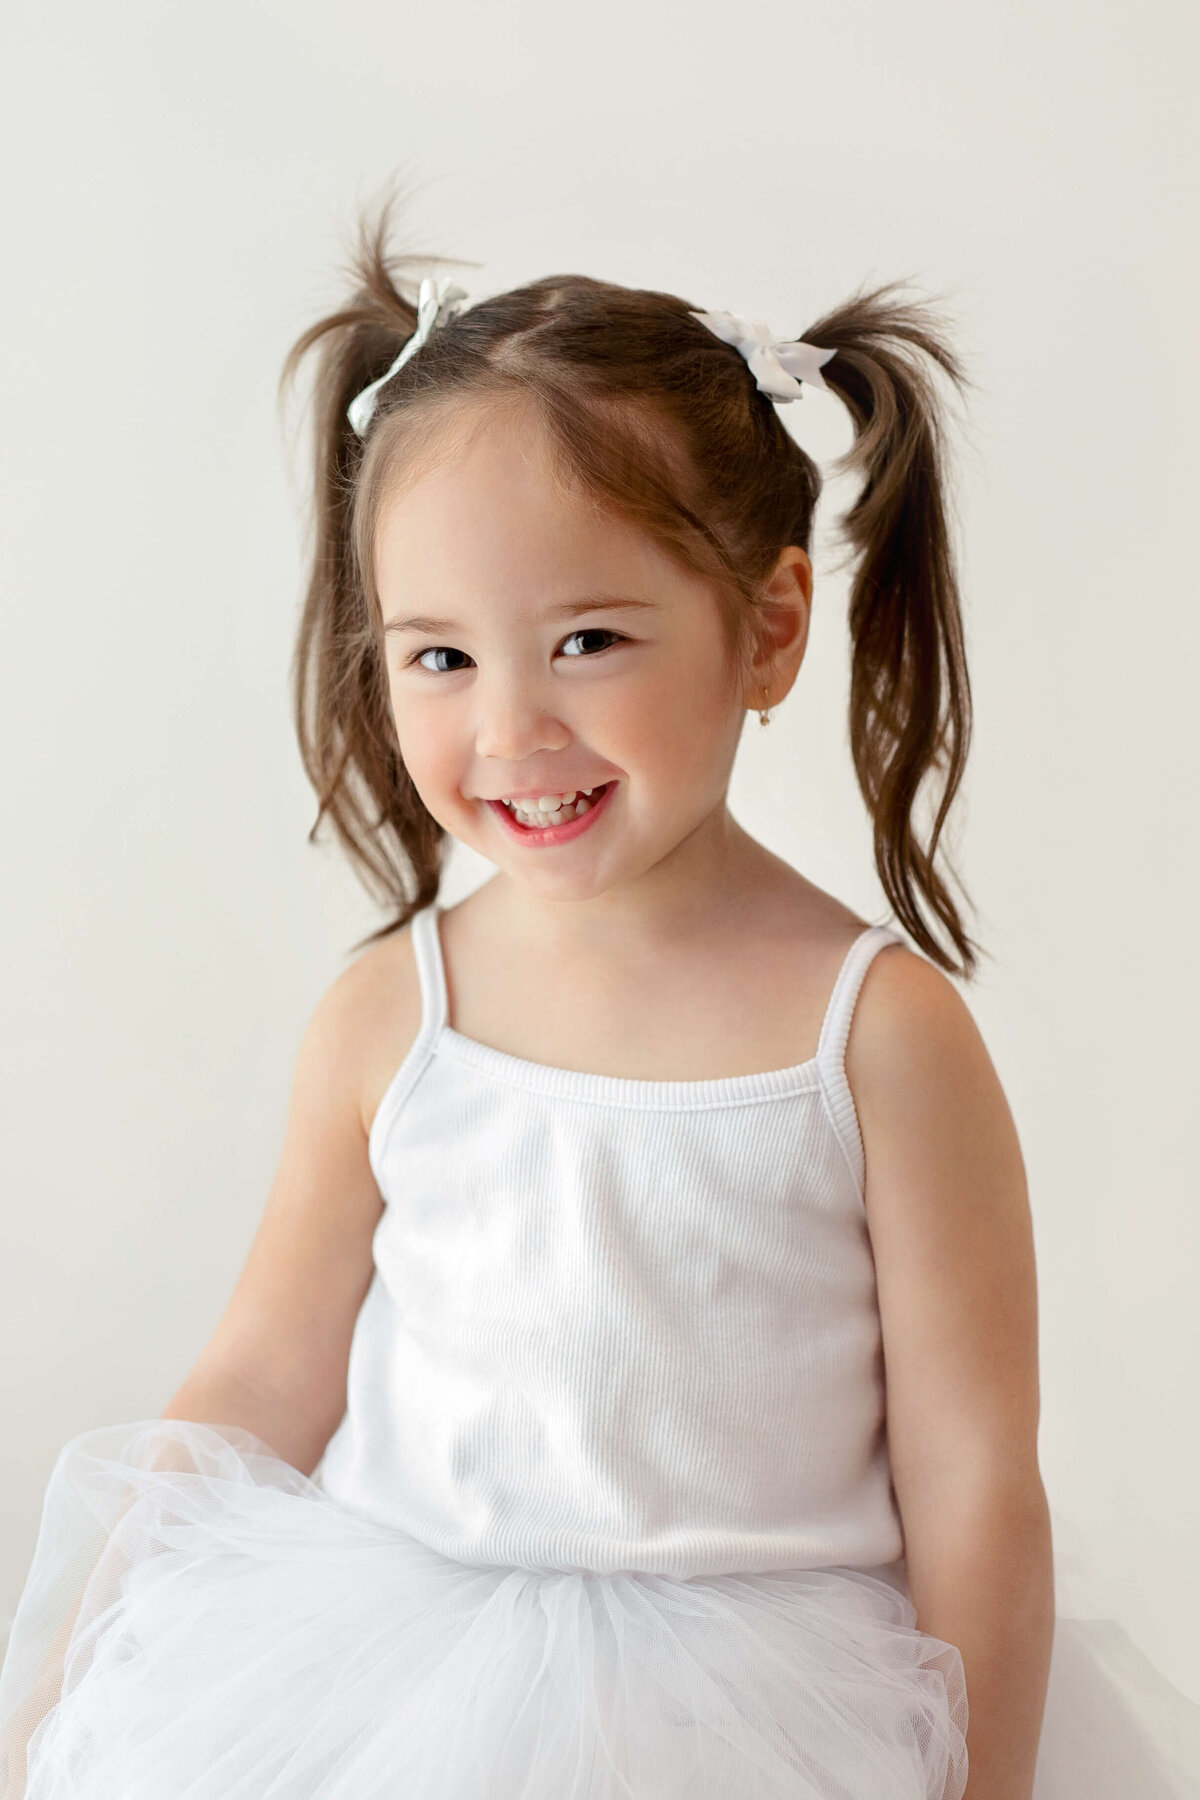 4 year old girl with pig-tails in a white dress at a child photography session